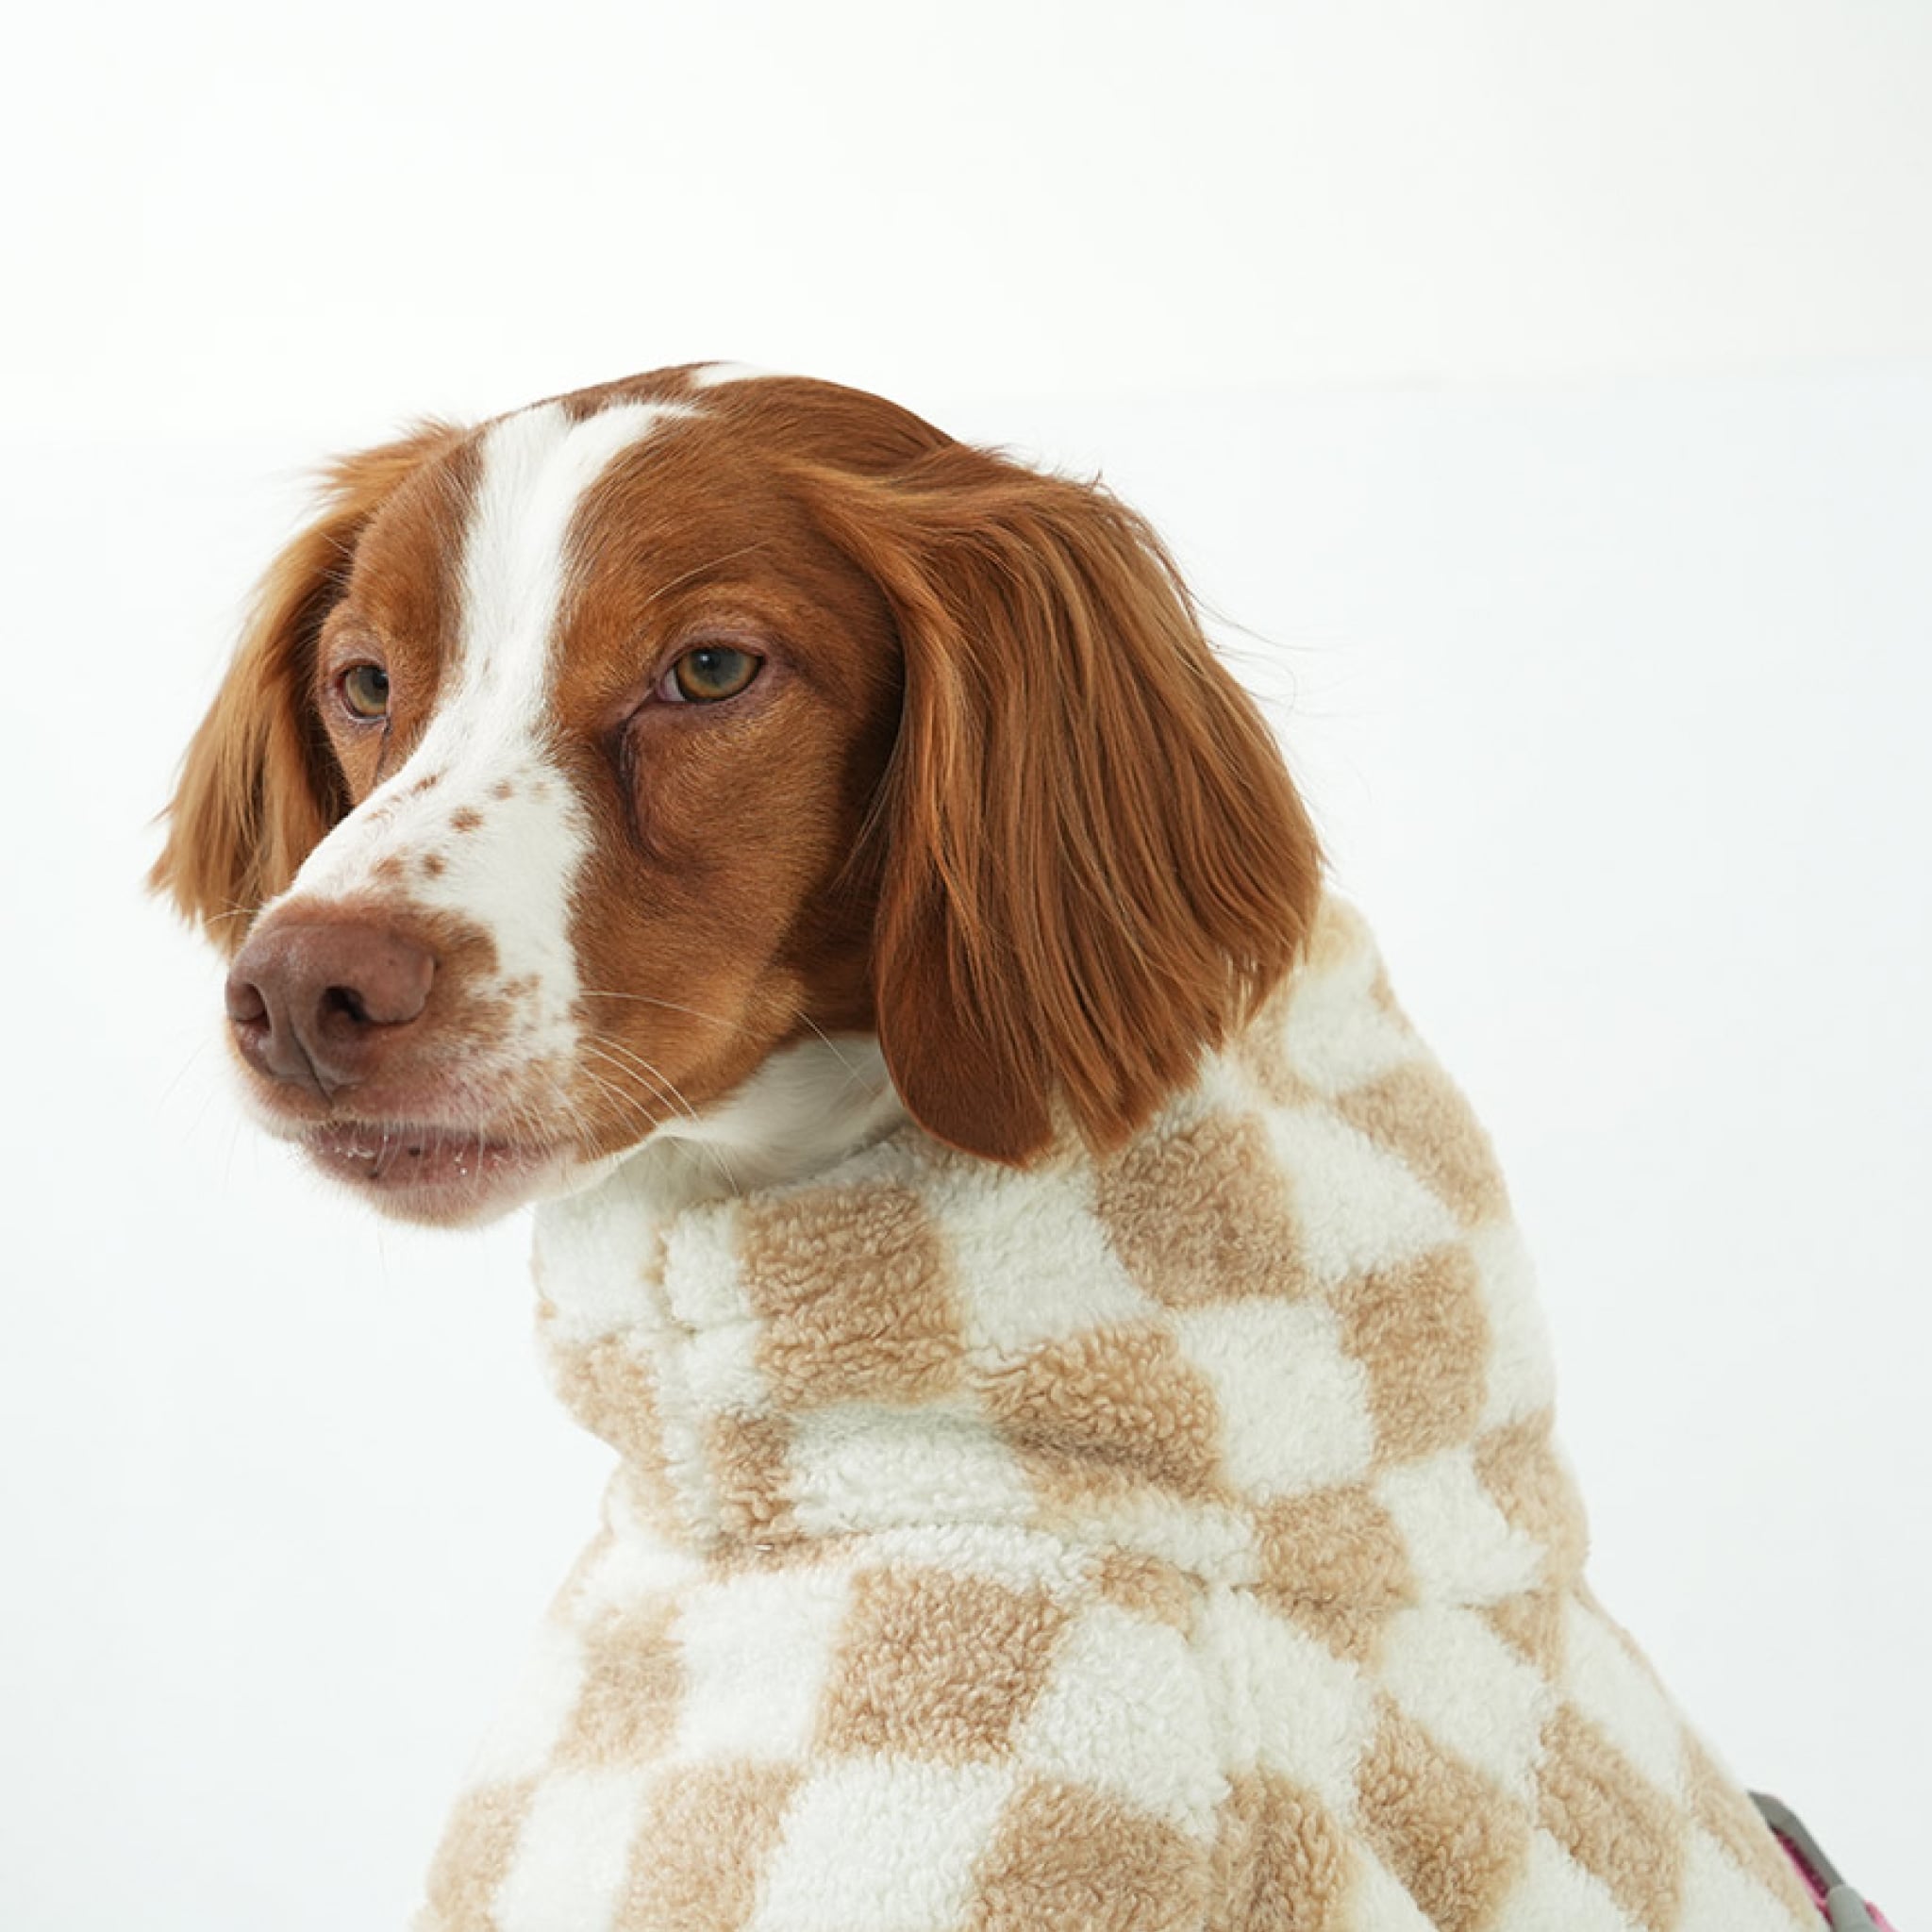 Dog wearing the beige and white checkerboard fleece padding jacket